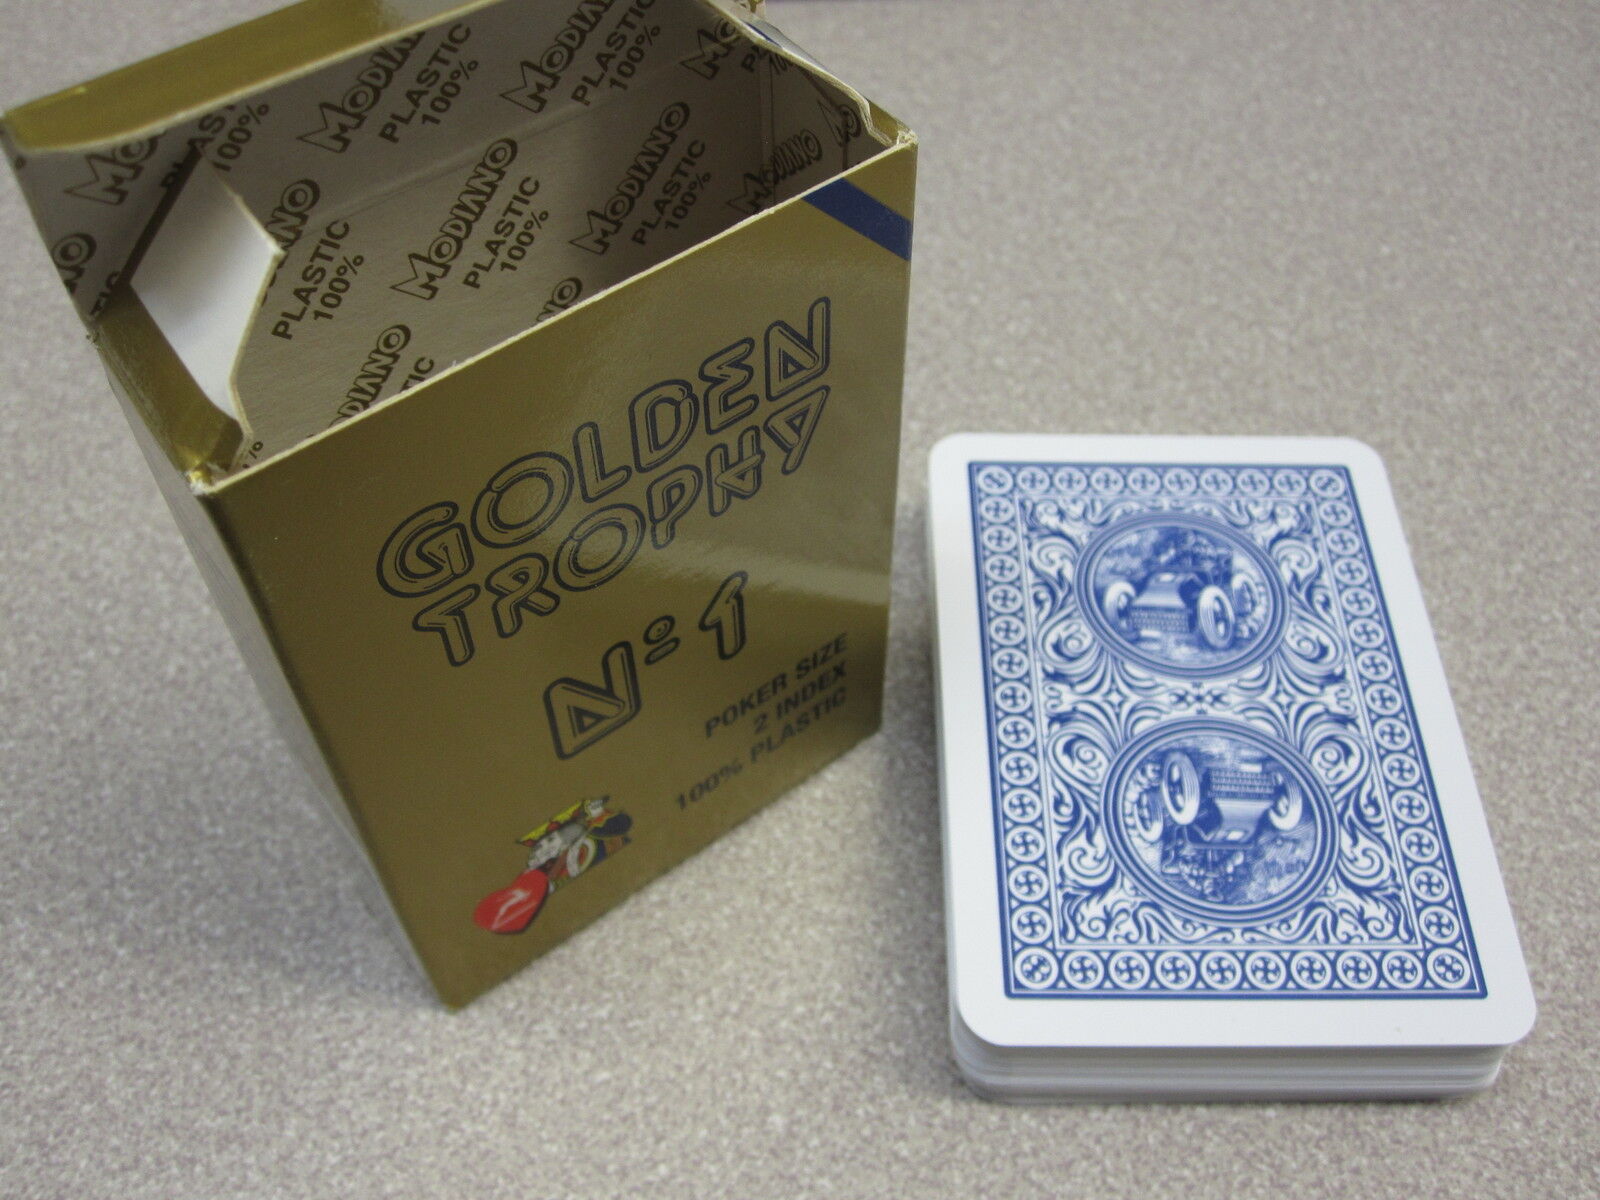 Modiano Plastic Playing Card Deck, GOLDEN TROPHY BLUE, Made in Italy, New